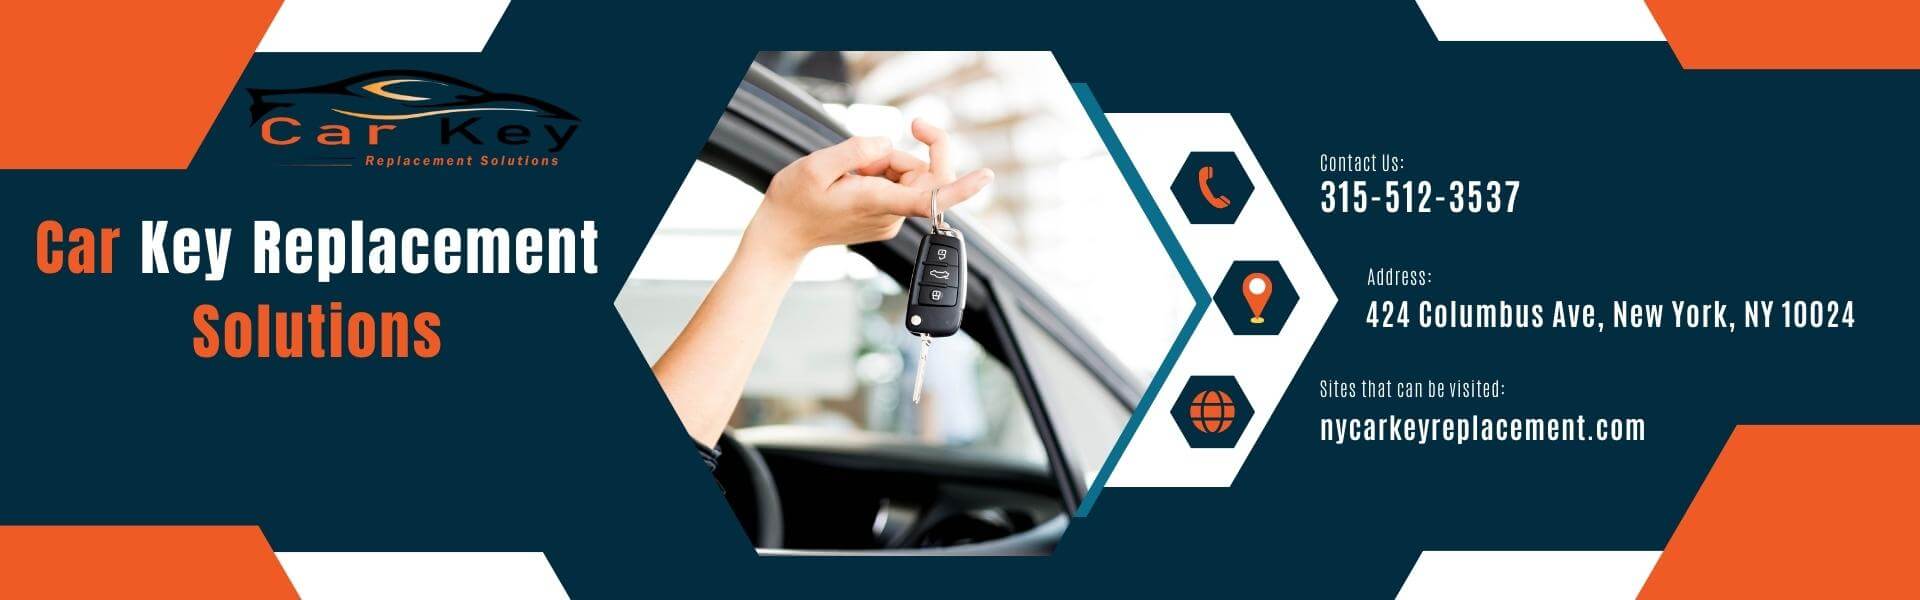 Contact Us - Car Key Replacement Solutions